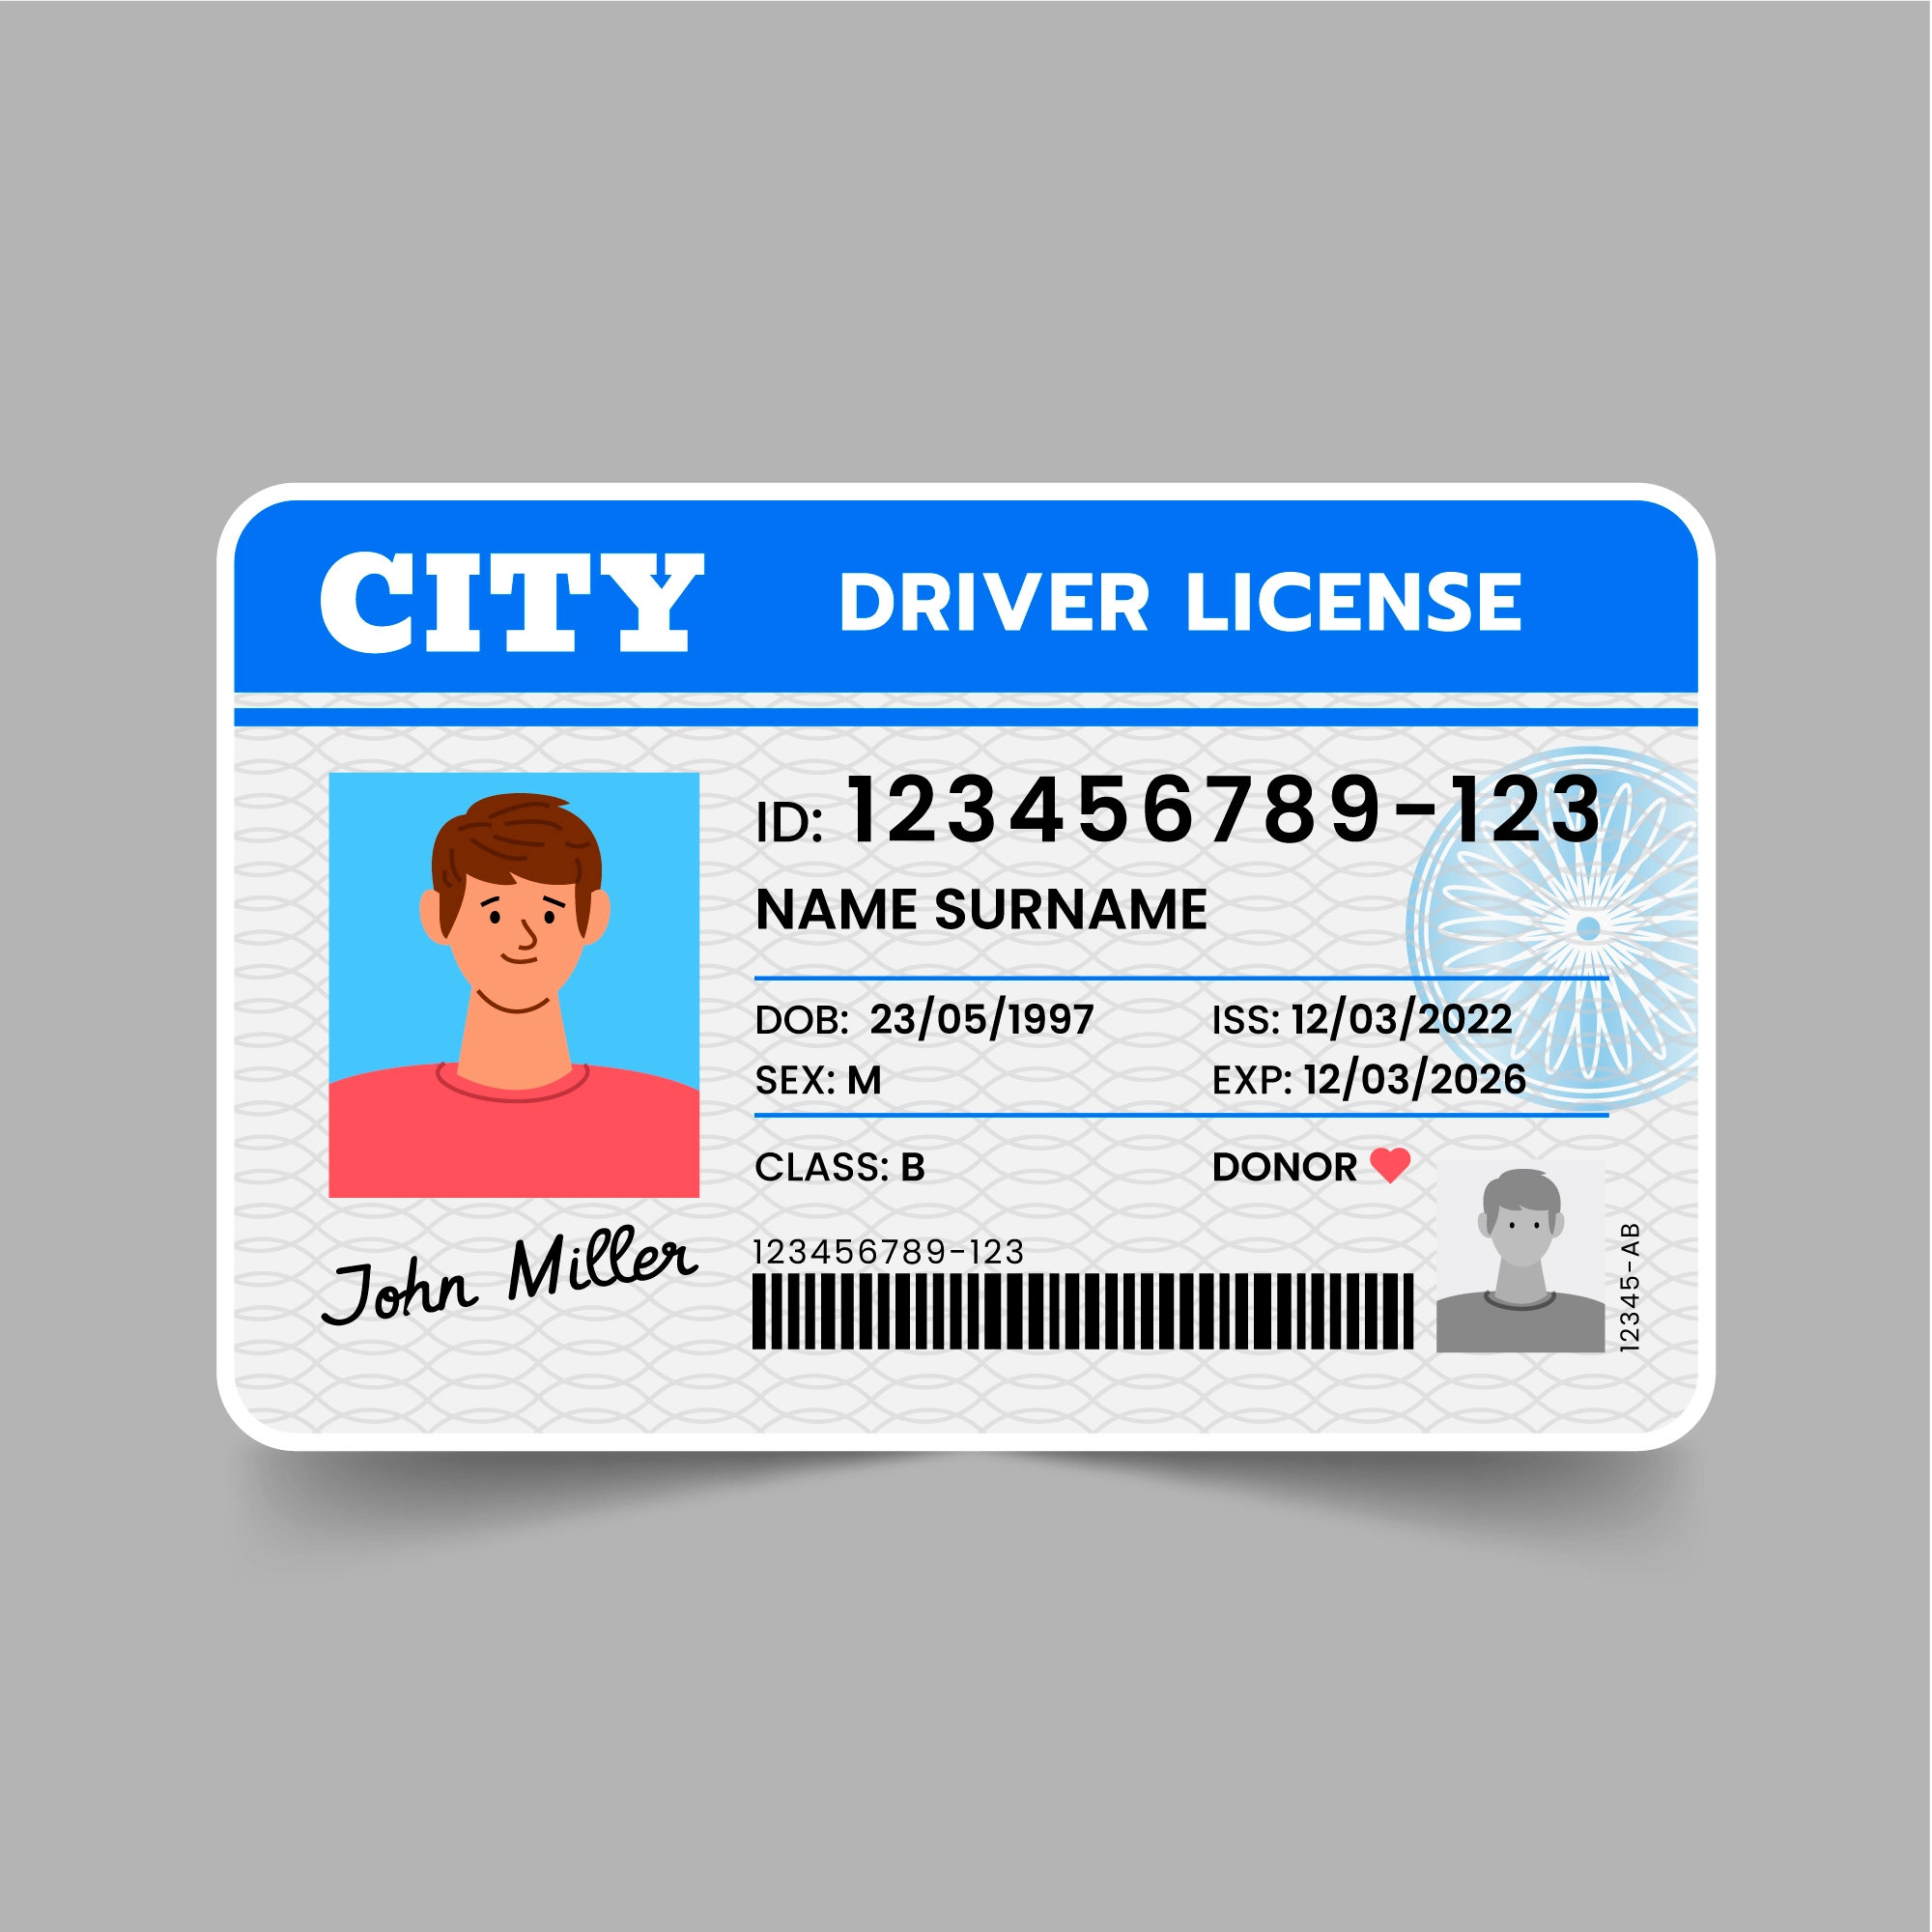 How to Obtain a Driving License: A Comprehensive Guide